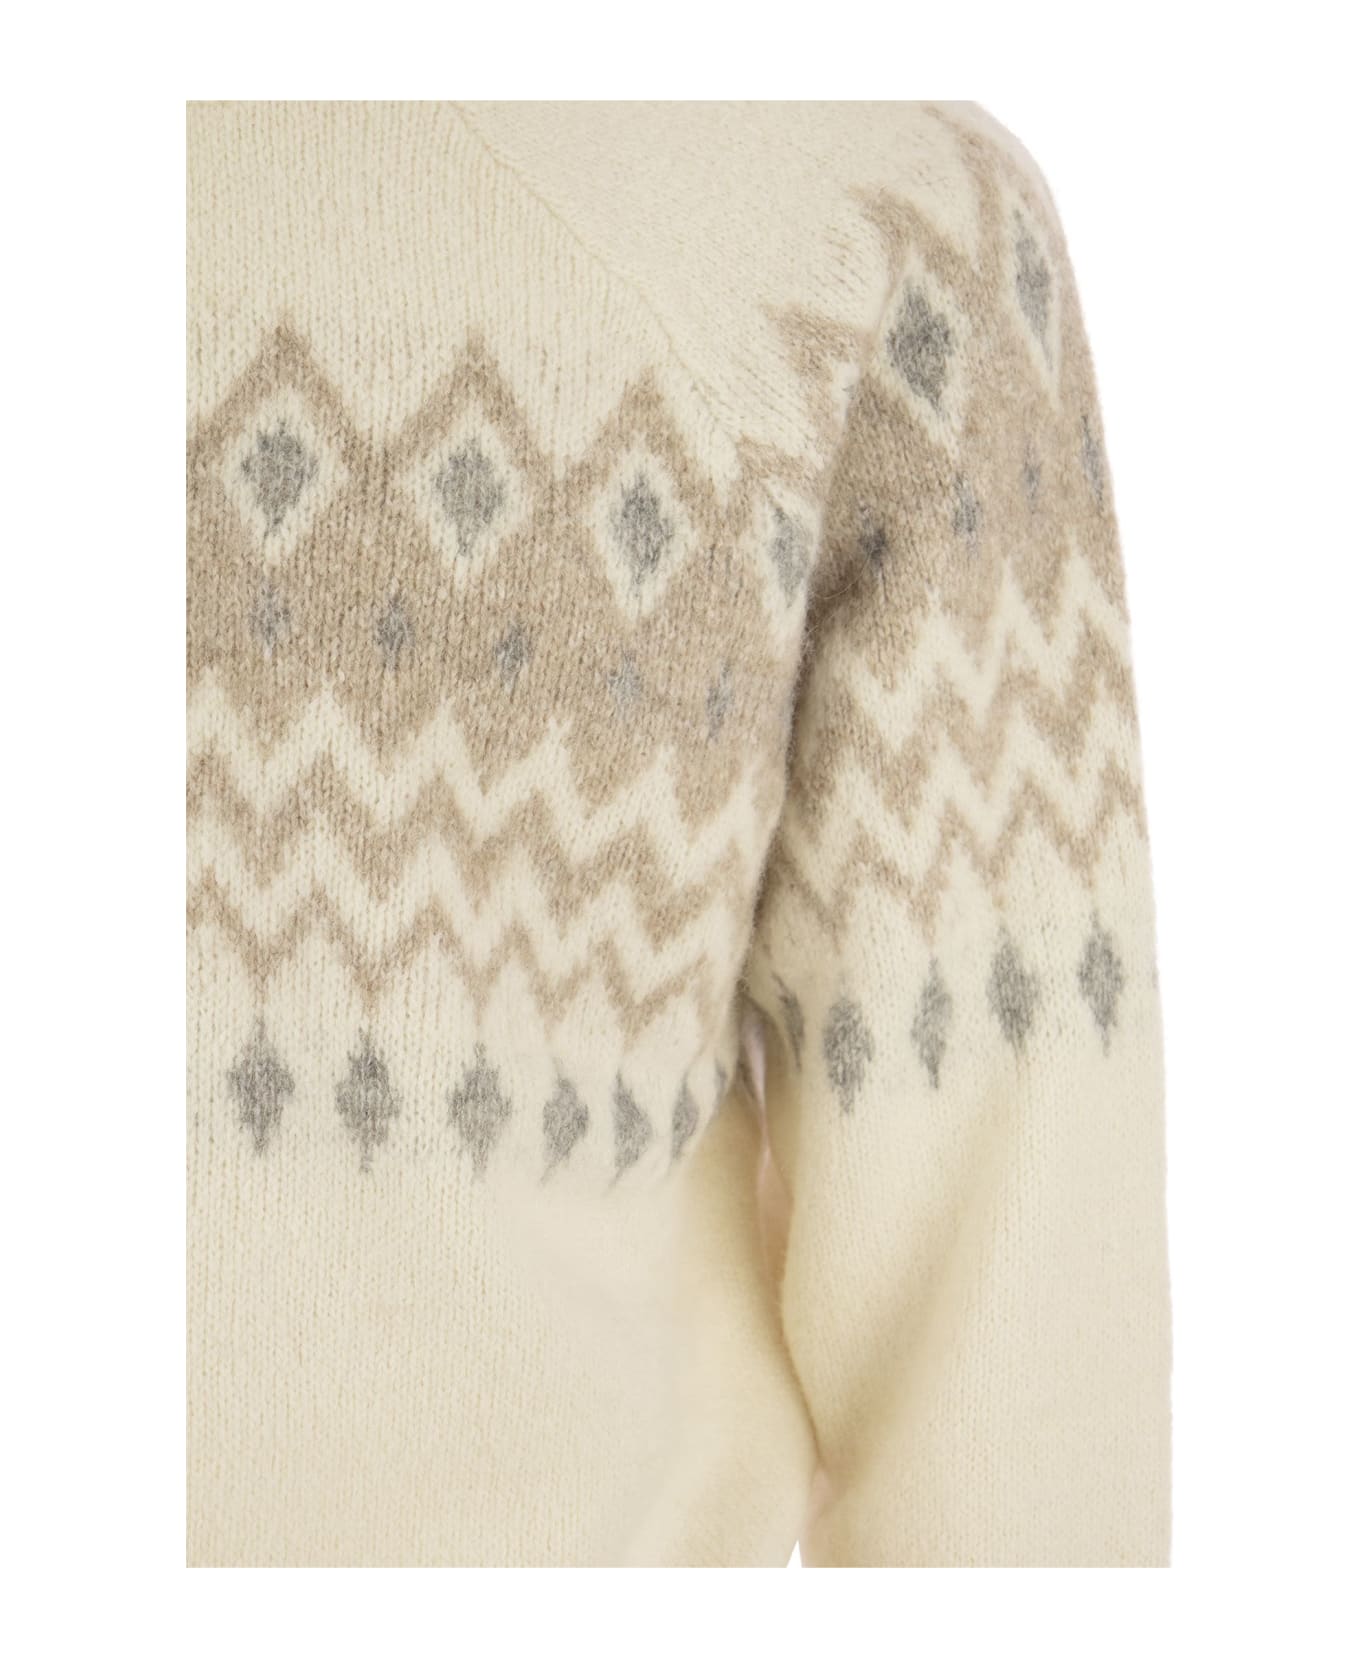 Brunello Cucinelli Icelandic Jacquard Buttoned Sweater In Alpaca, Cotton And Wool - Panama/grey/sand ニットウェア